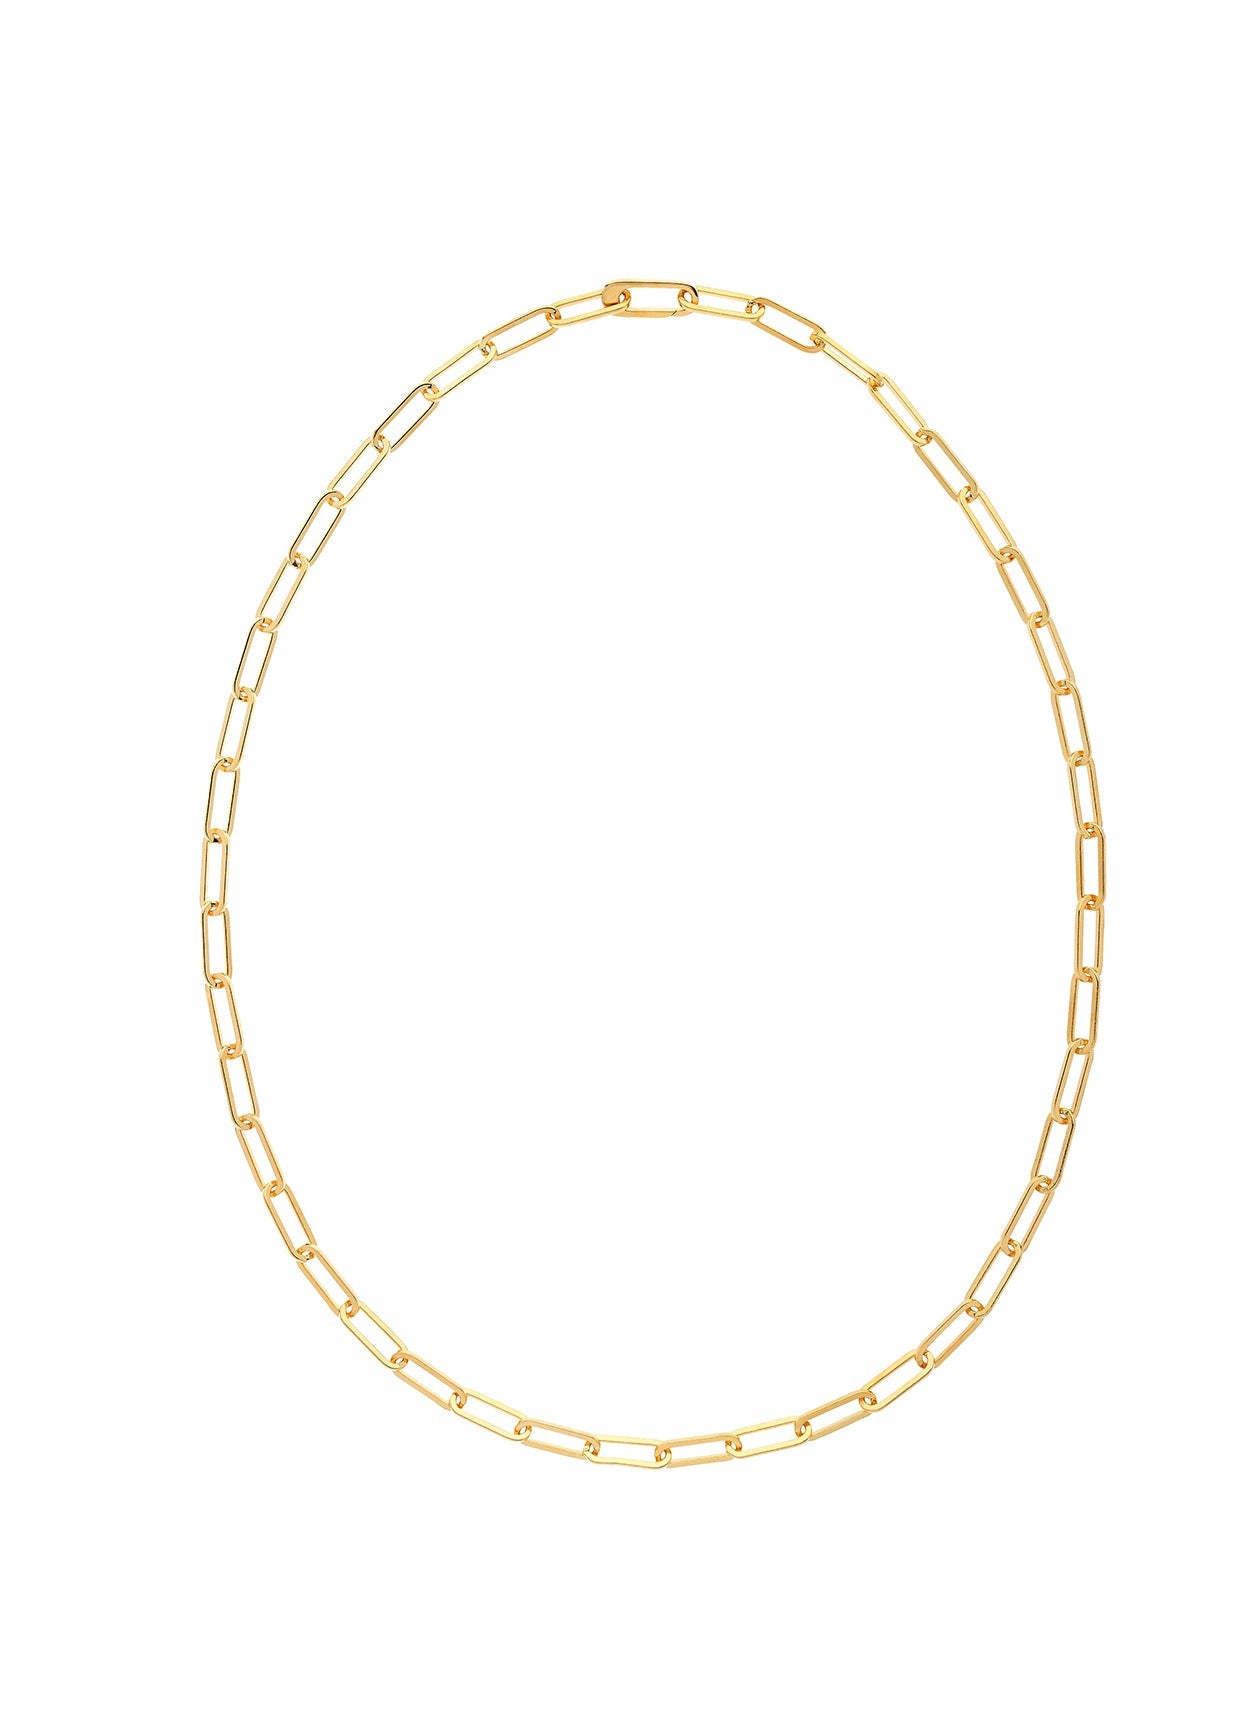 Gold Paperclip Chain Long Necklace-2024